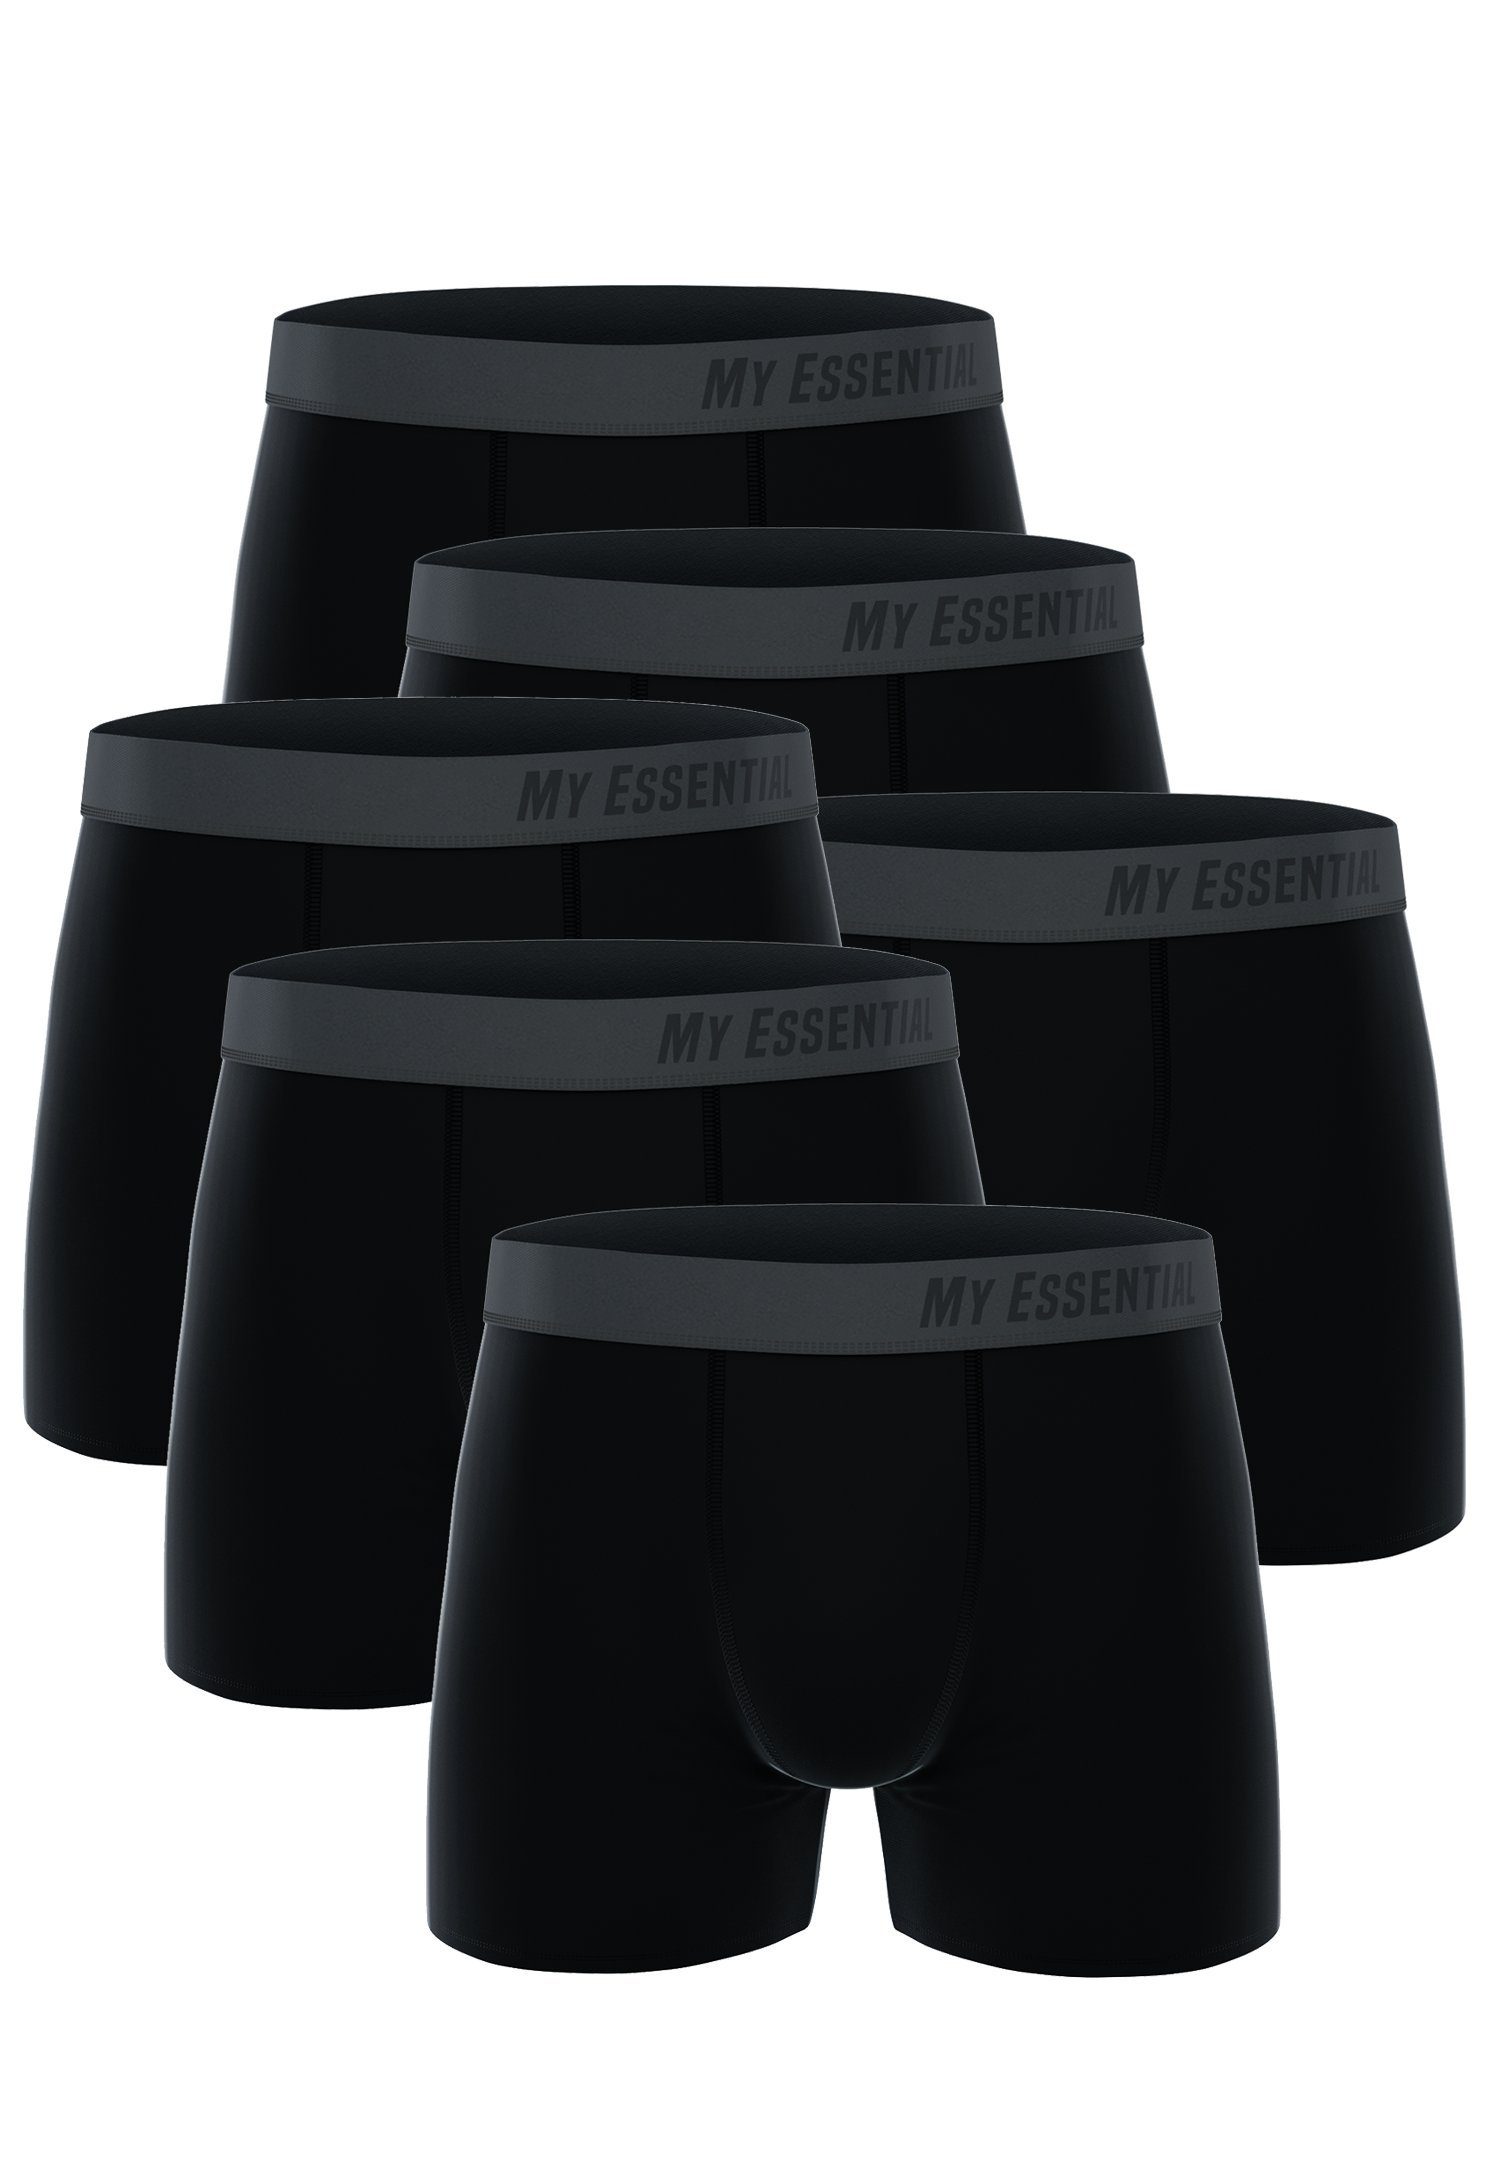 My Bio Black Pack Essential 6 (Spar-Pack, Clothing Cotton 6-St., Boxers 6er-Pack) My Essential Boxershorts